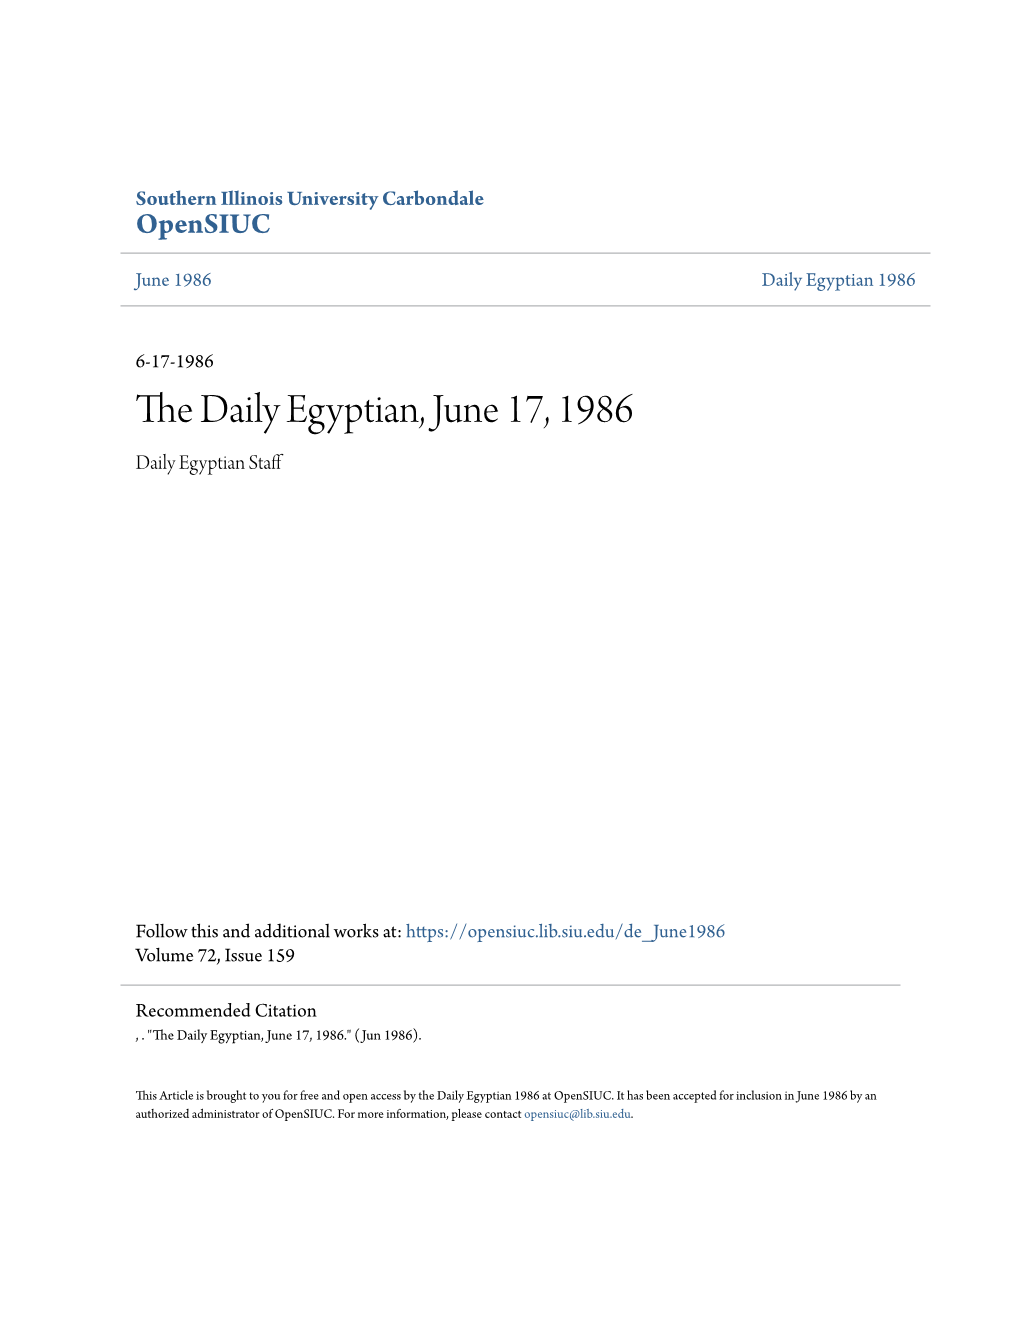 The Daily Egyptian, June 17, 1986